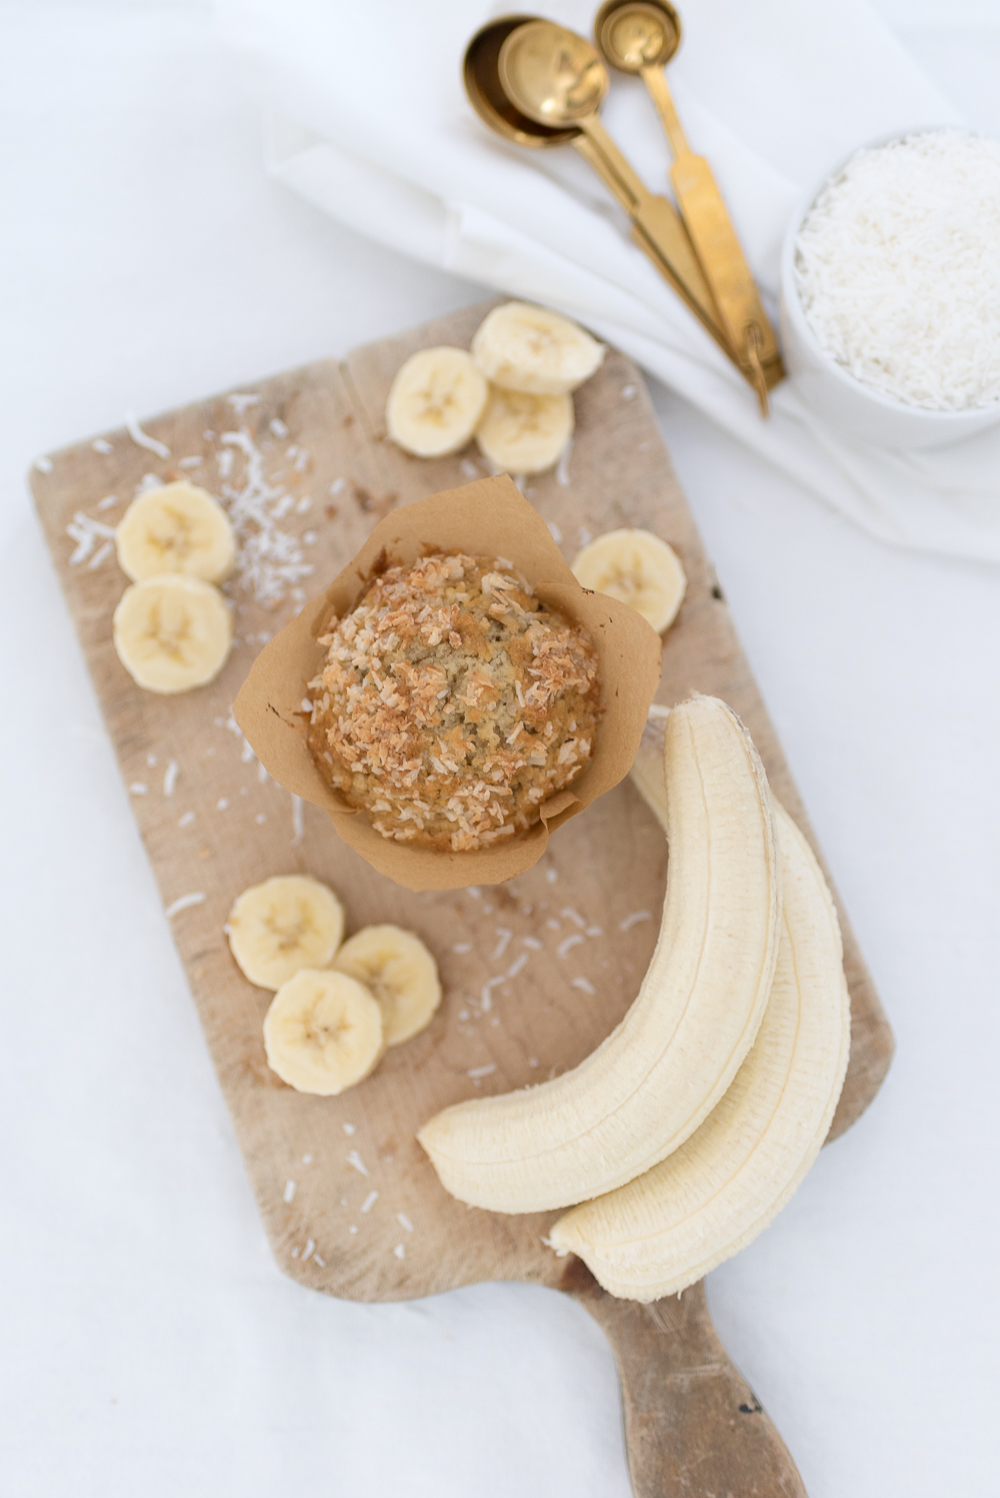 This simple banana coconut muffin recipe is perfect for breakfast on busy mornings or makes a delicious afternoon snack.